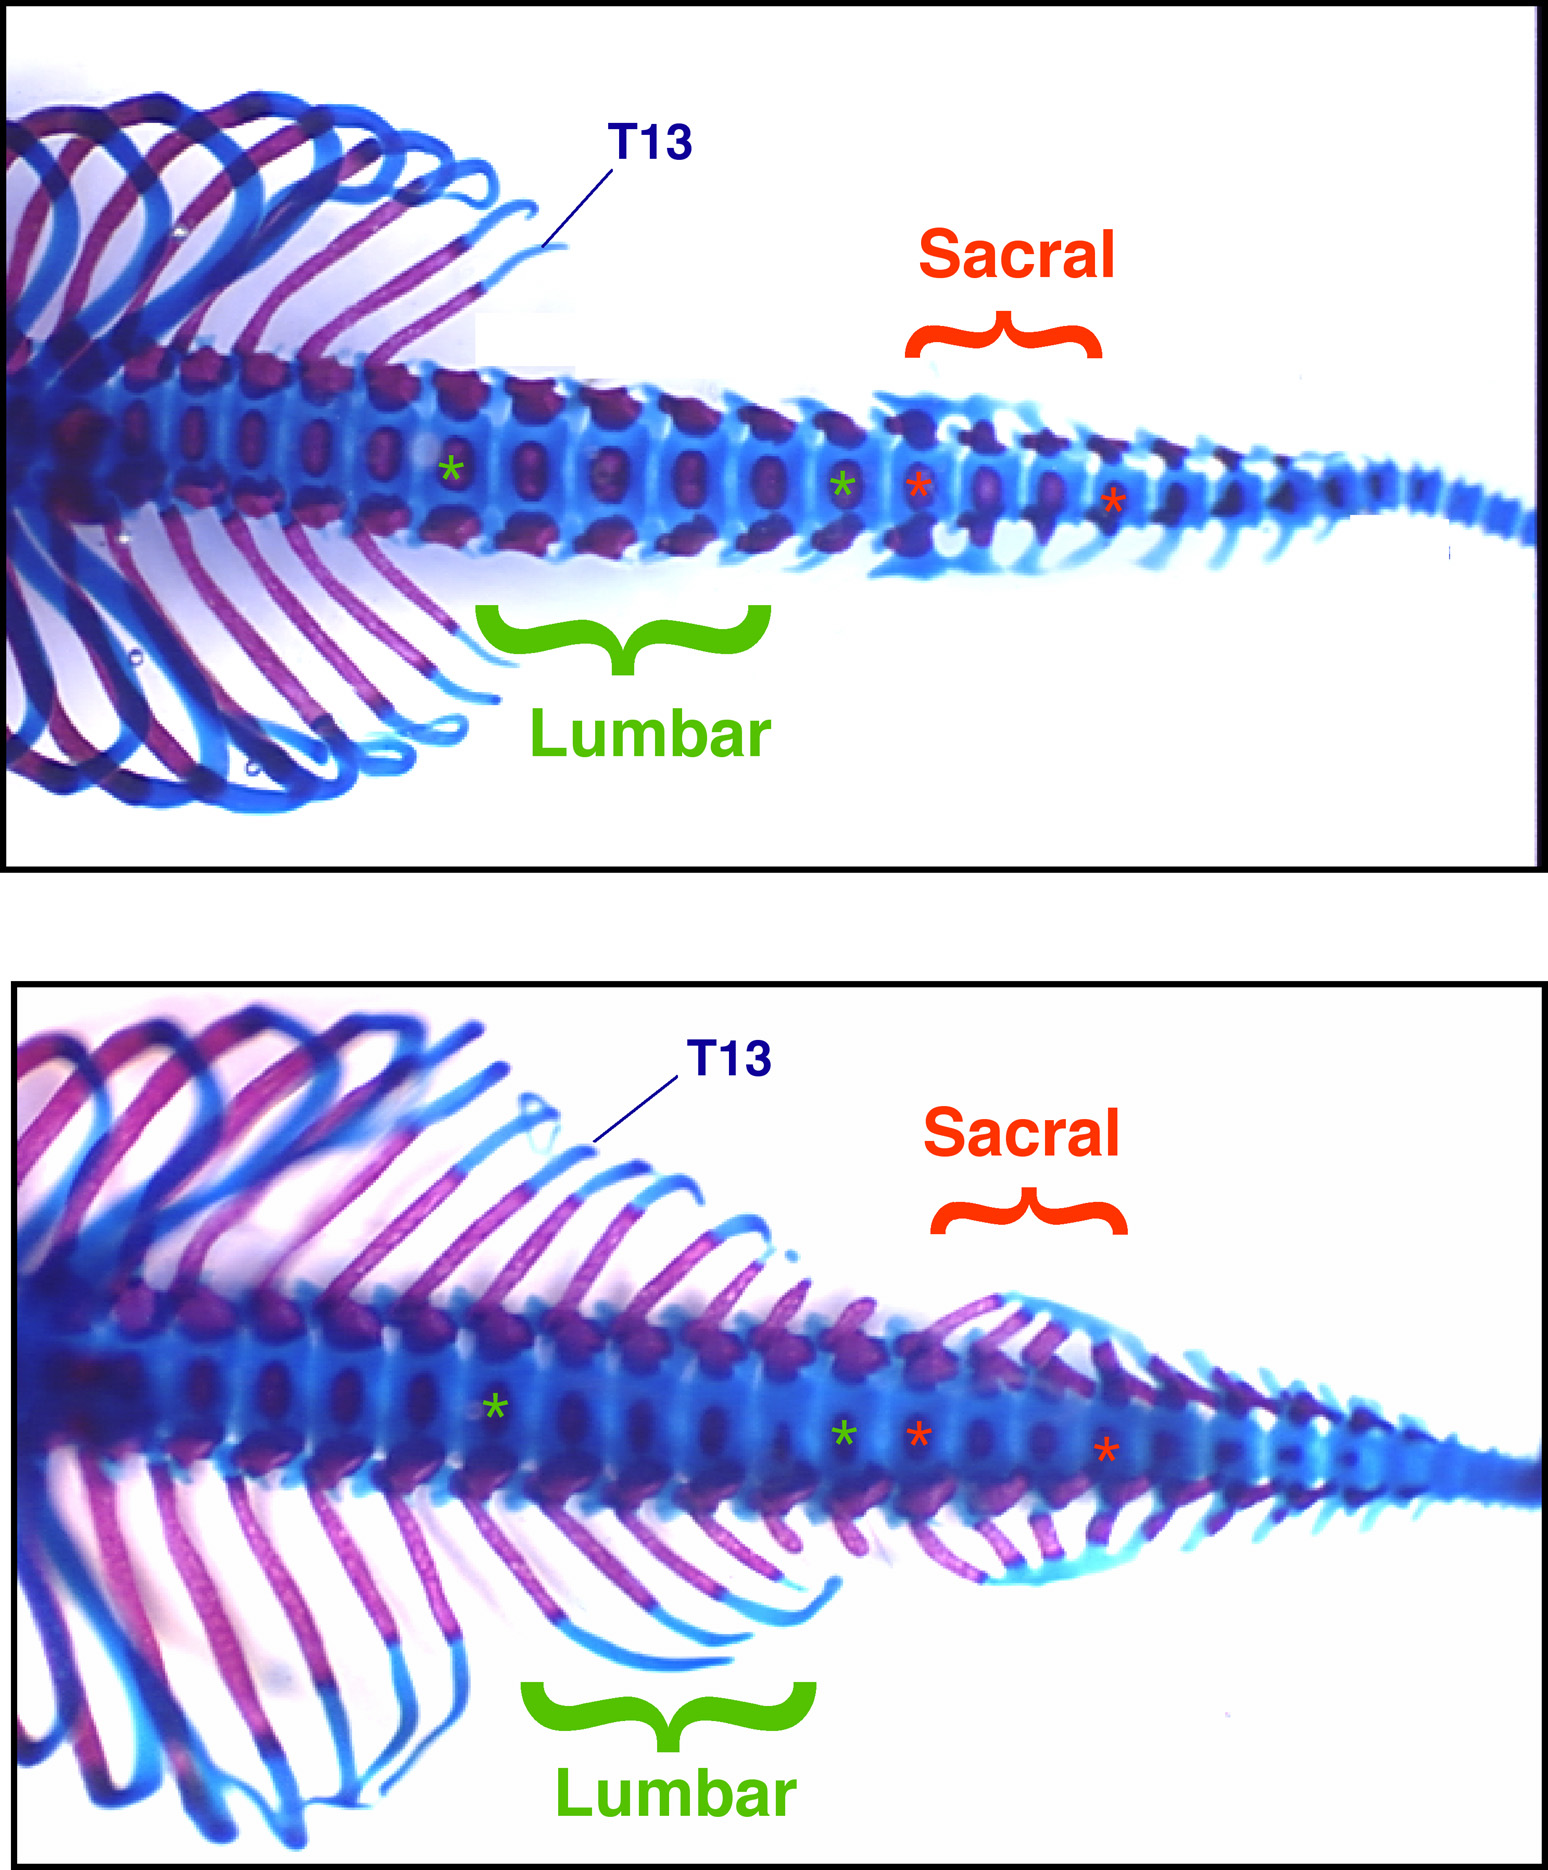 Top photo shows the back half of a normal mouse skeleton. Note the ribs end at T13, the 13th thoracic or chest vertebra. The lumbar (lower back) and sacral (pelvic) vertebrae form normally. But when Hox10 genes are disabled, as shown in bottom photo, ribs grow from vertebrae all the way from the chest to the tail.